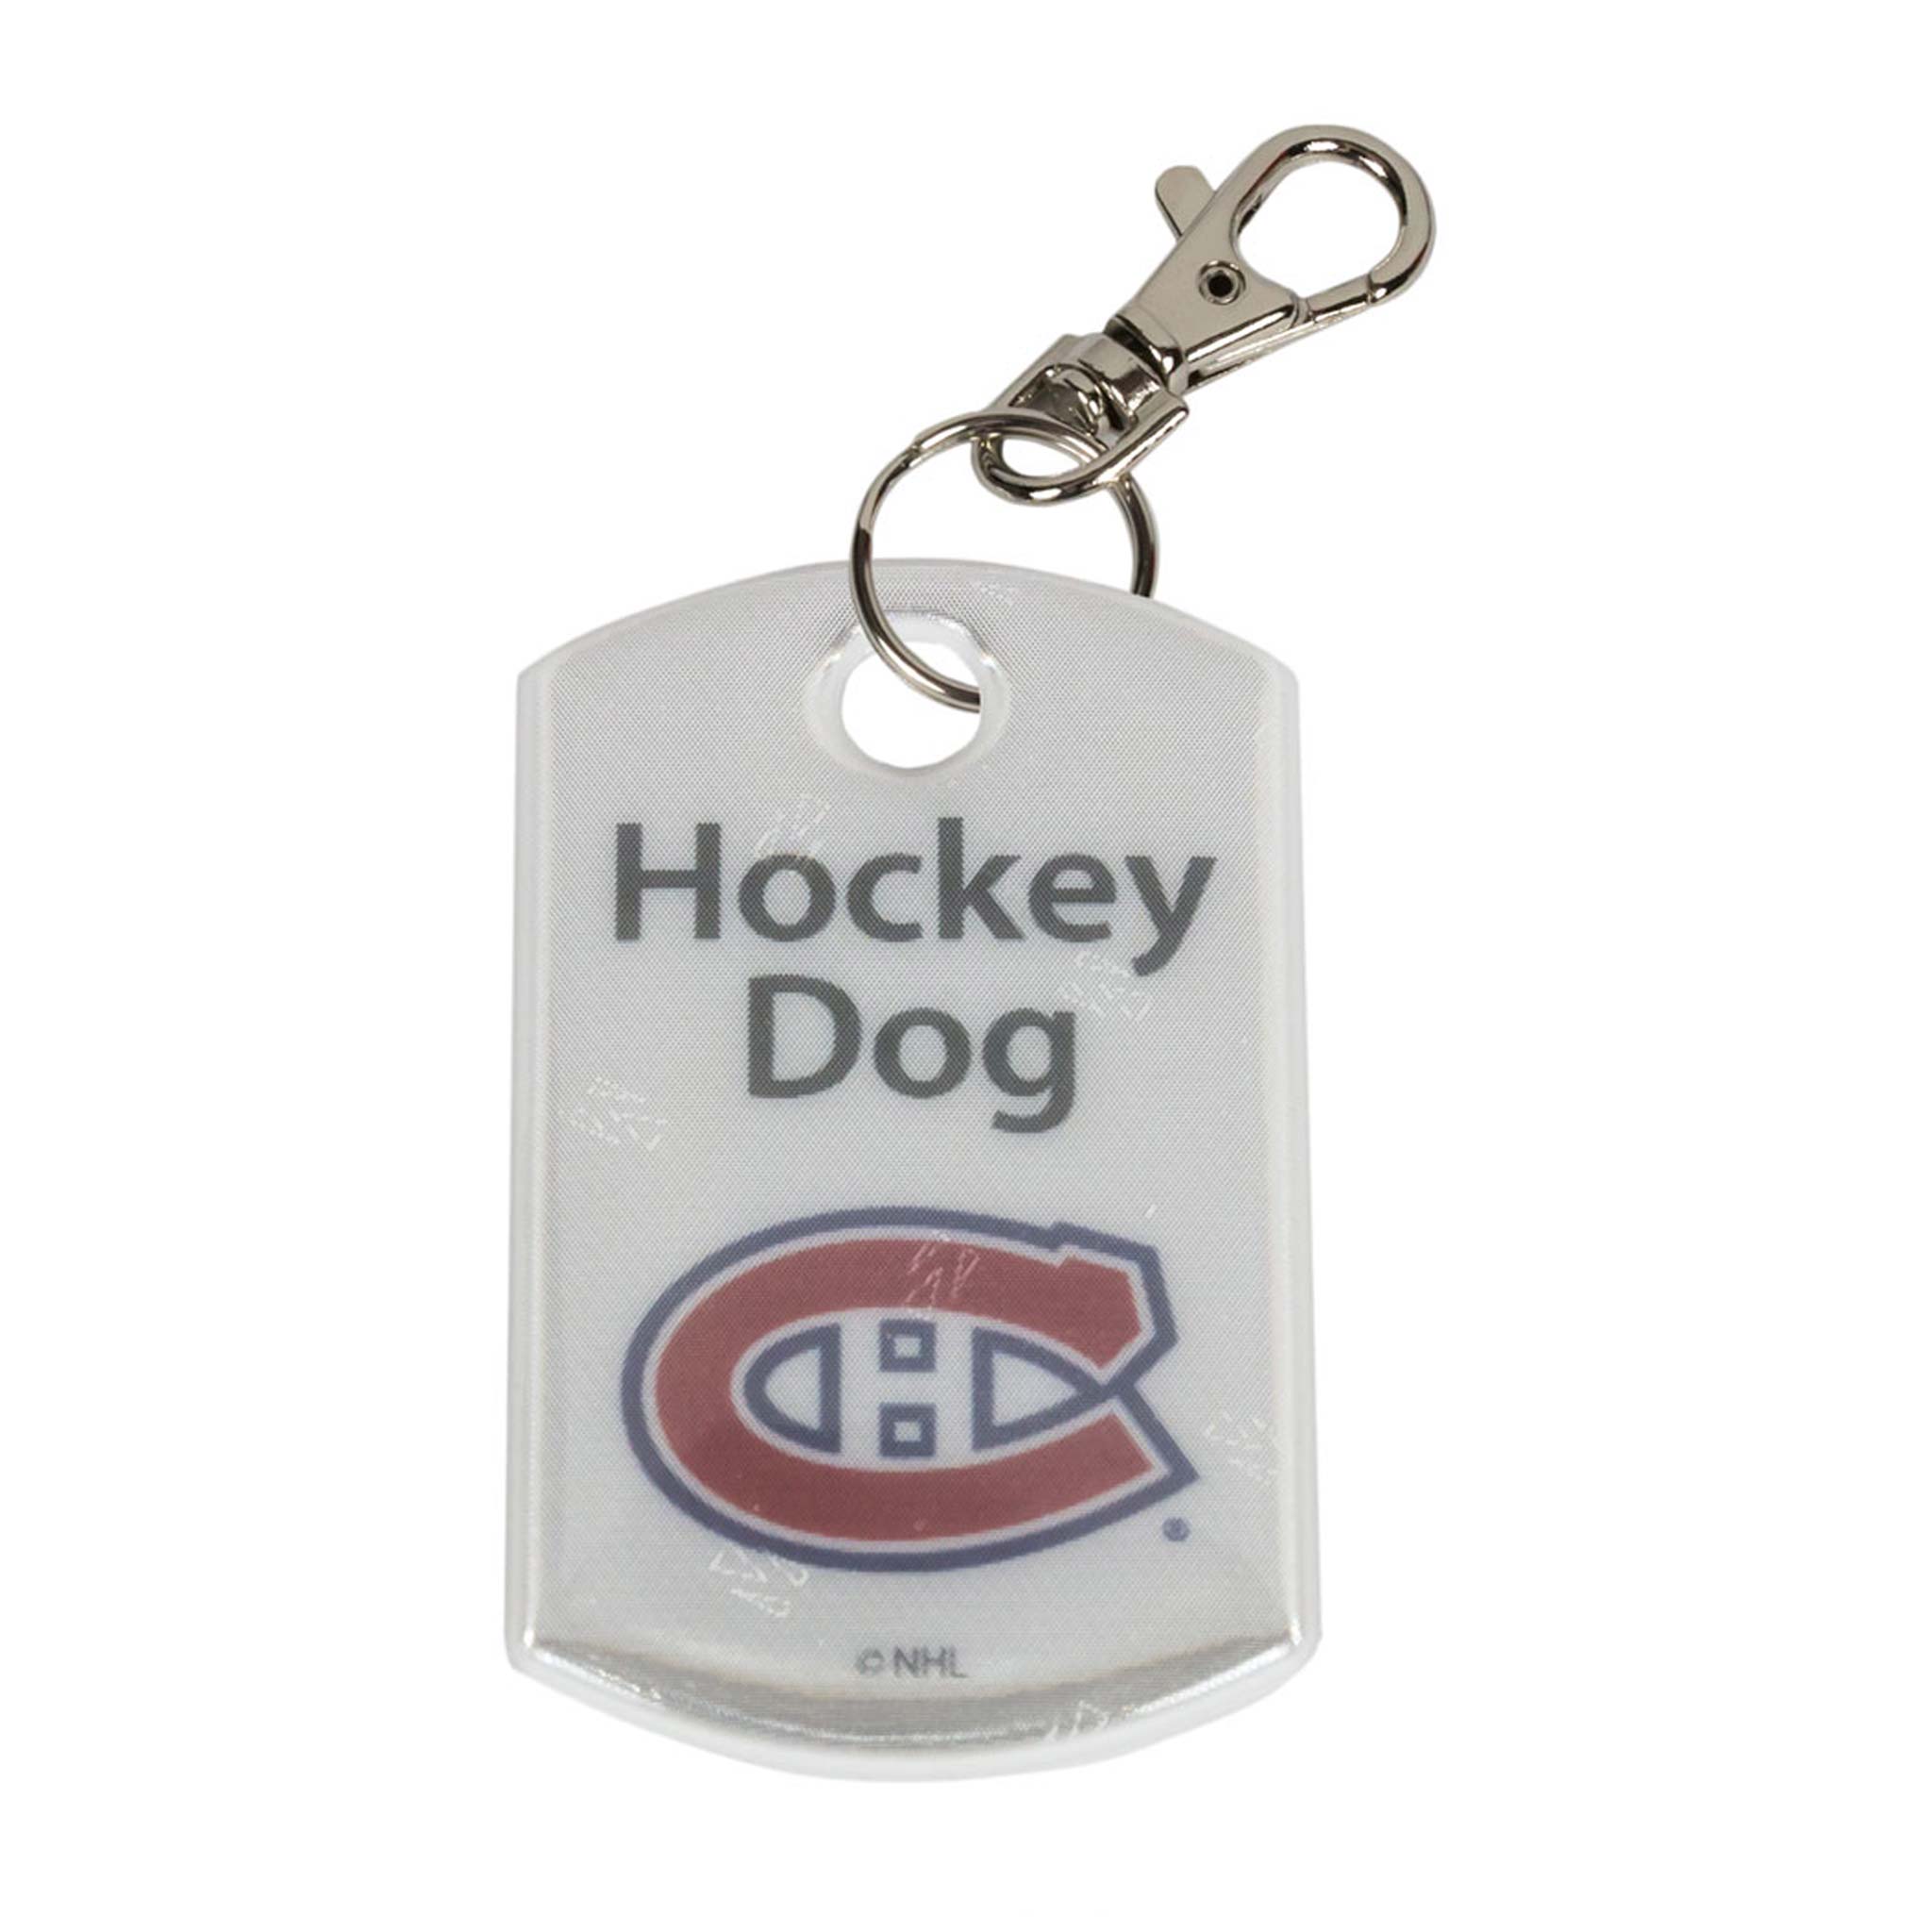 Montreal_Canadiens_Hockey_Dog_Front